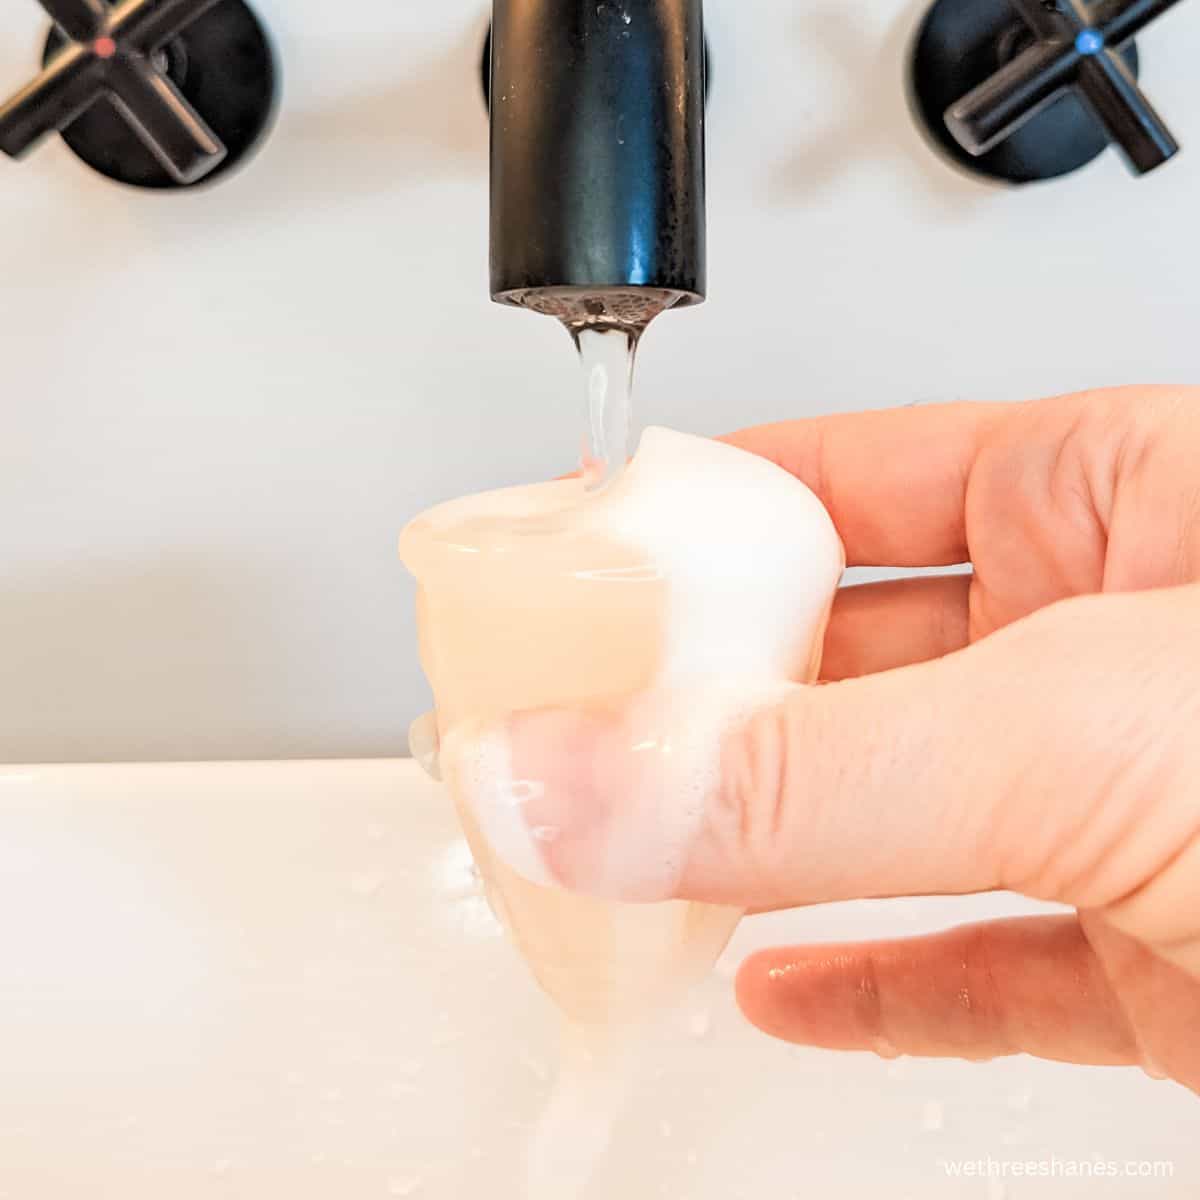 How to Properly Clean and Sterilize a Menstrual Cup